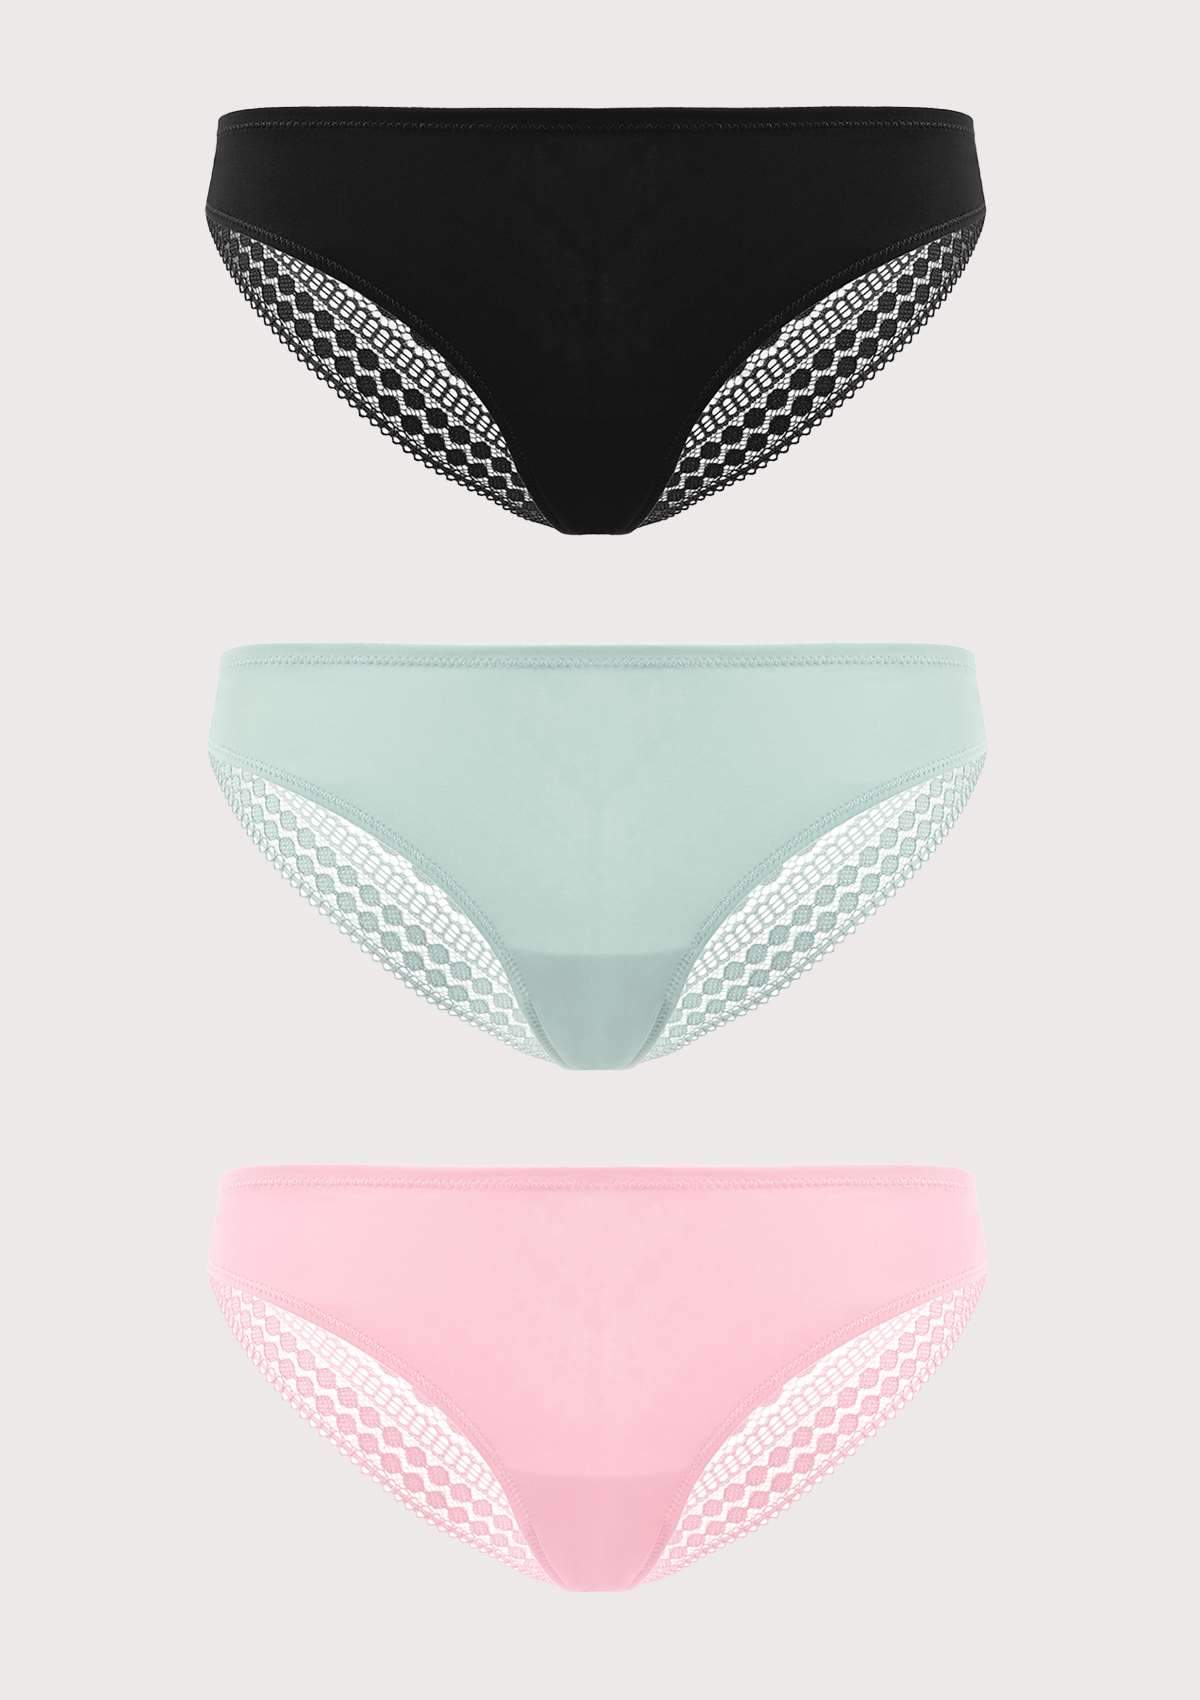 HSIA Polka Dot Super Soft Lace Back Cheeky Panties 3 Pack - XXL / Black+Frosty Green+Pink